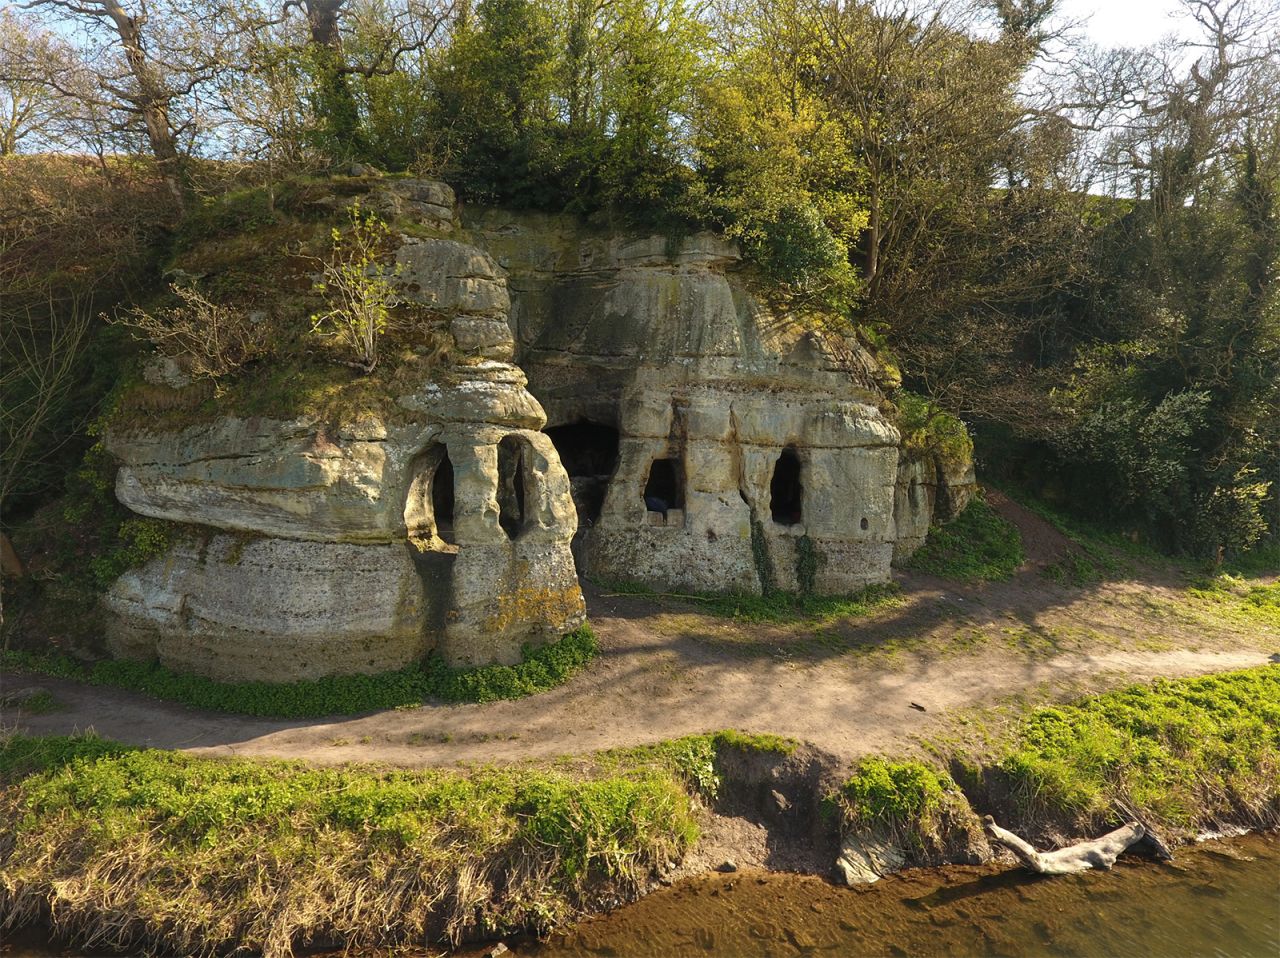 The cave was altered in the 18th century, with brickwork and window frames added.